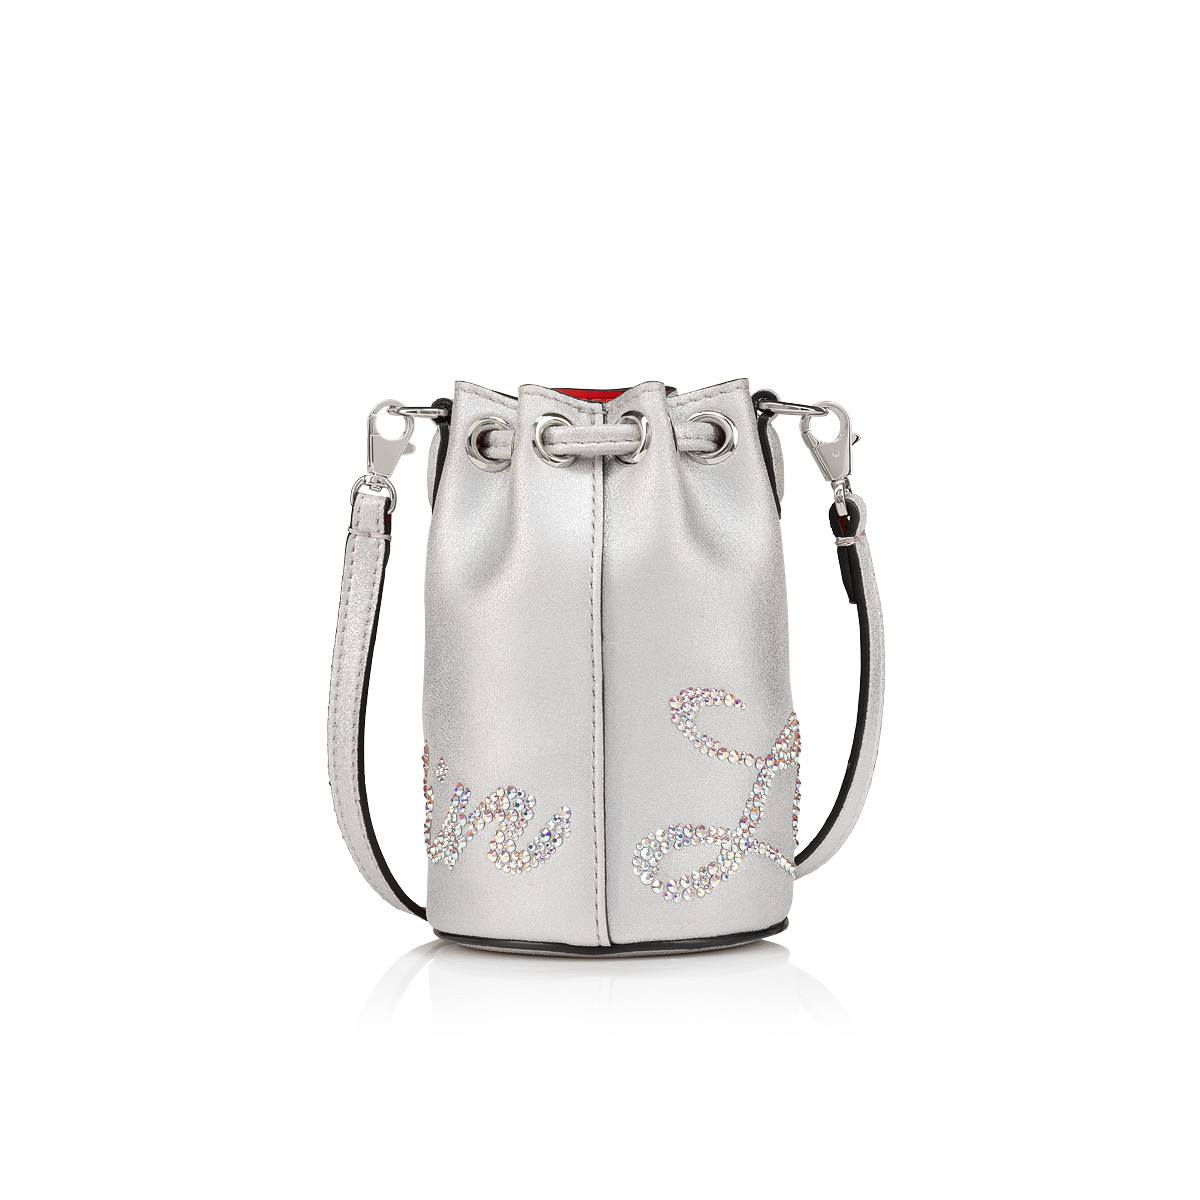 Christian Louboutin's Cabaraparis Bag Is An Artsy Ode To Paris - MOJEH